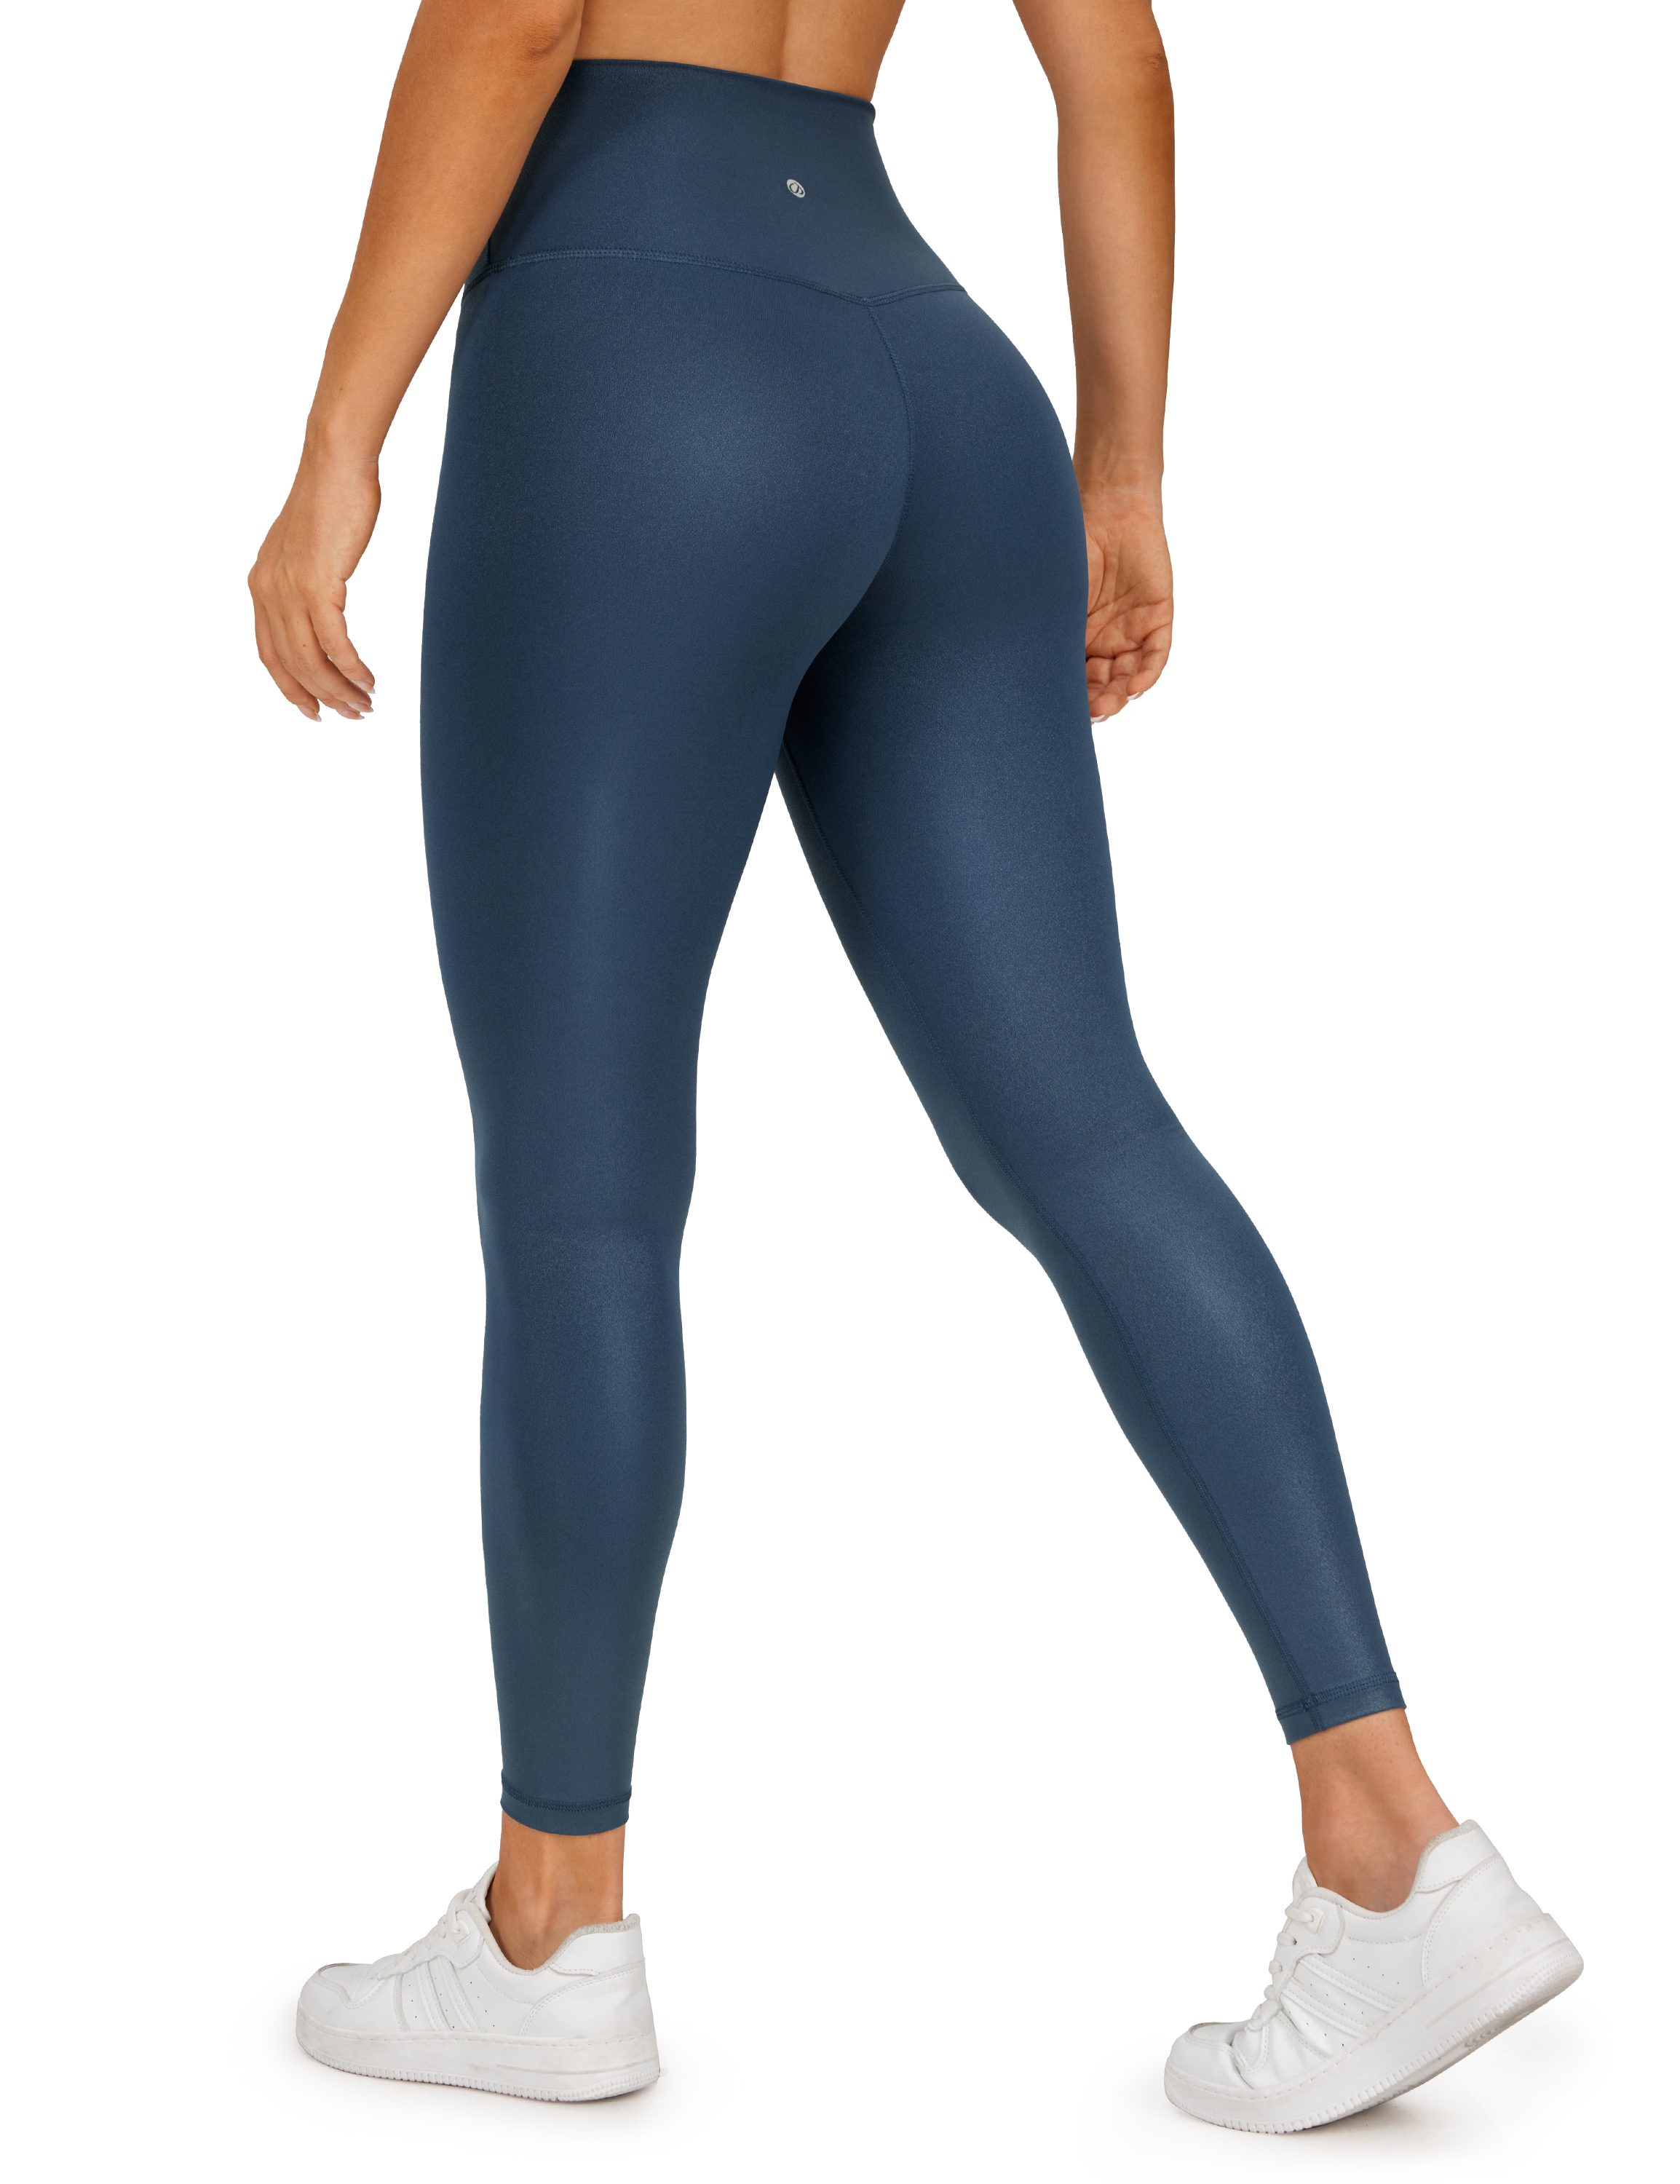  CRZ YOGA Butterluxe Plus Size Leggings For Women 25 Inches